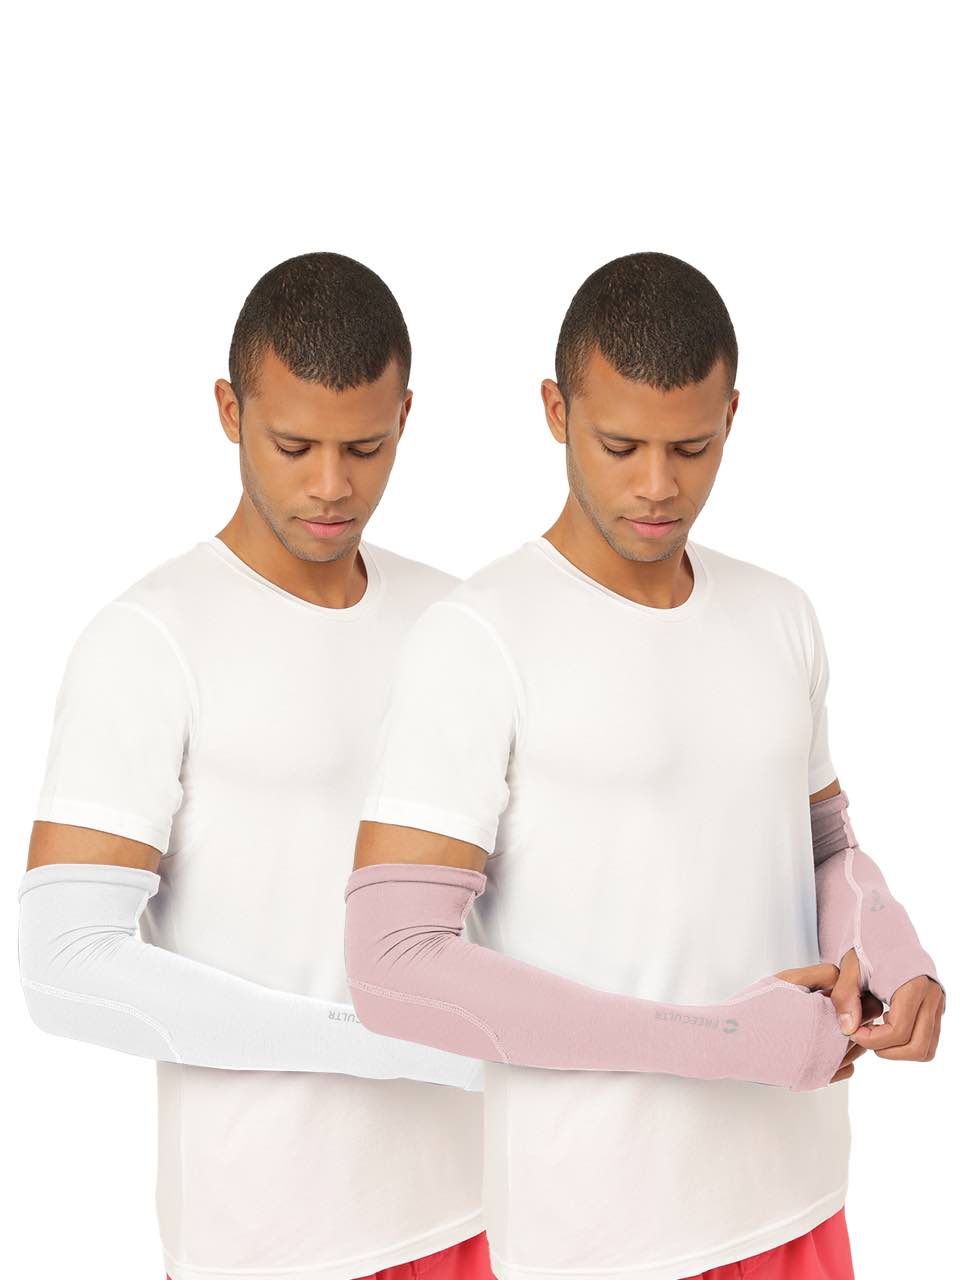 Unisex White Arm Sleeves (Pack of 2)